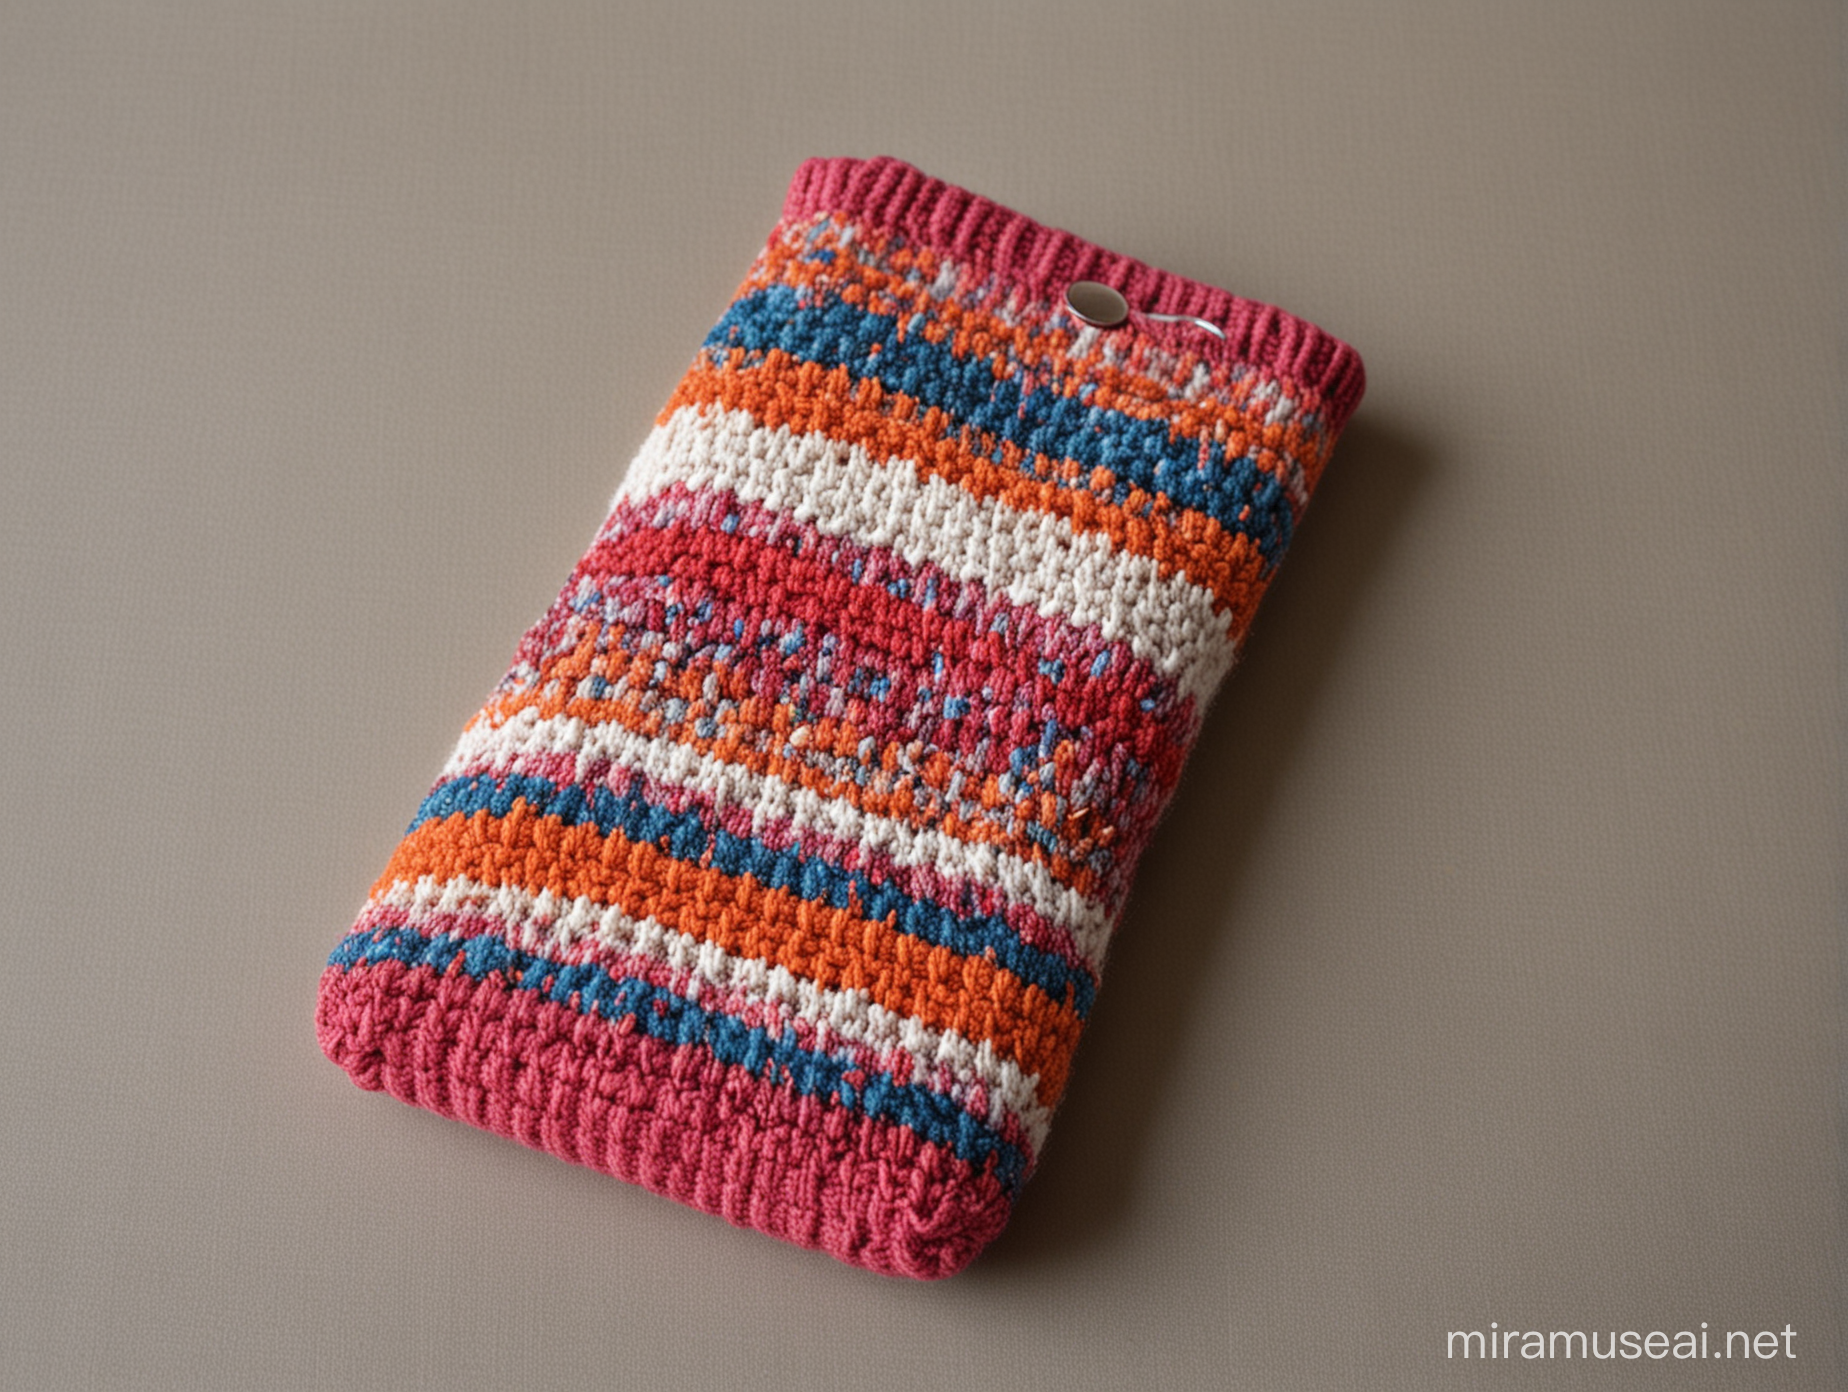 Colorful Knitwear Phone Pouch Handcrafted Accessory for Stylish Gadget Protection